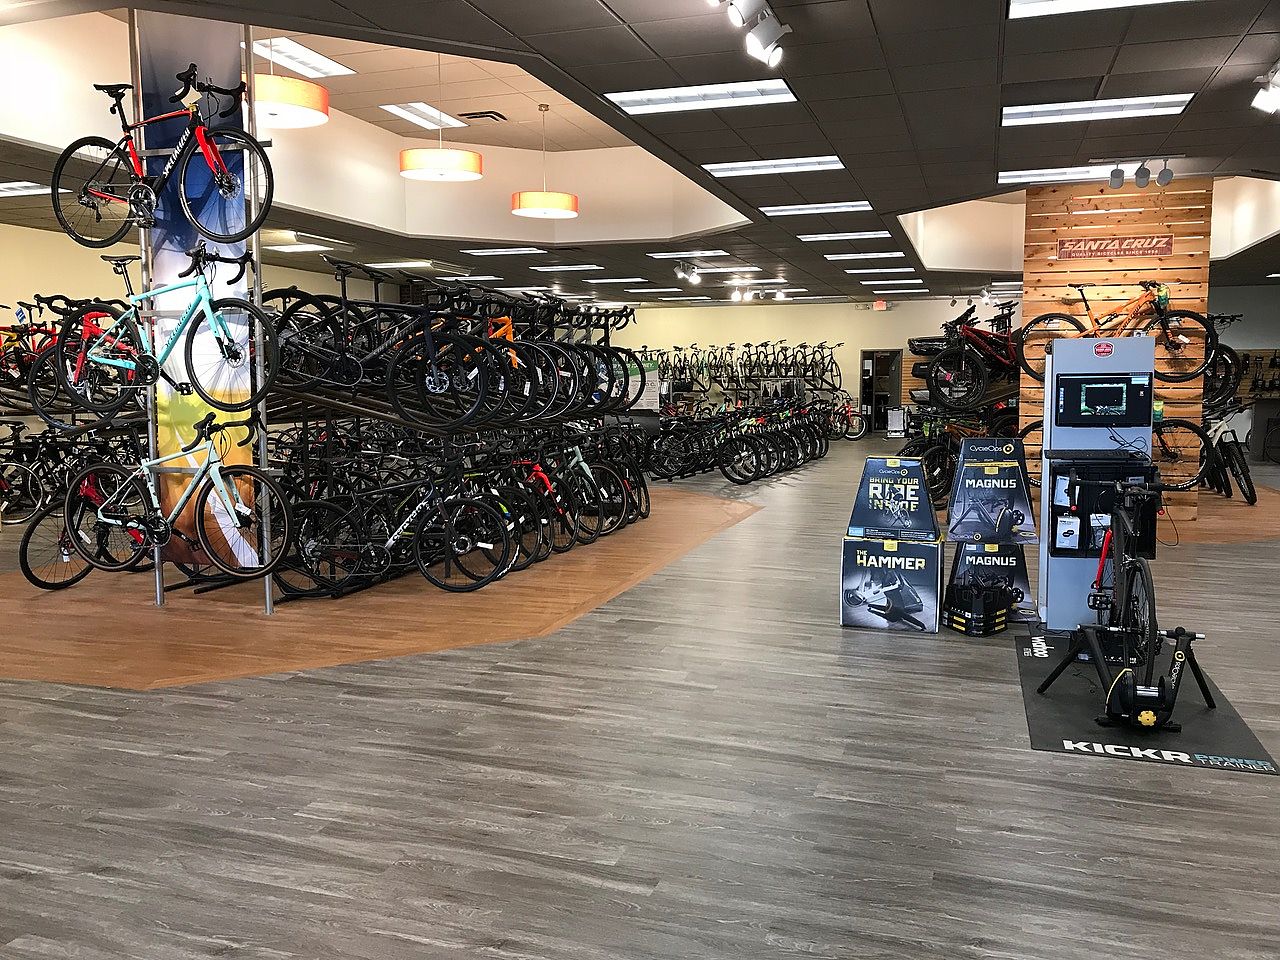 Pro Bike acquires Park Ave Bike Shop | Bicycle Retailer and Industry News